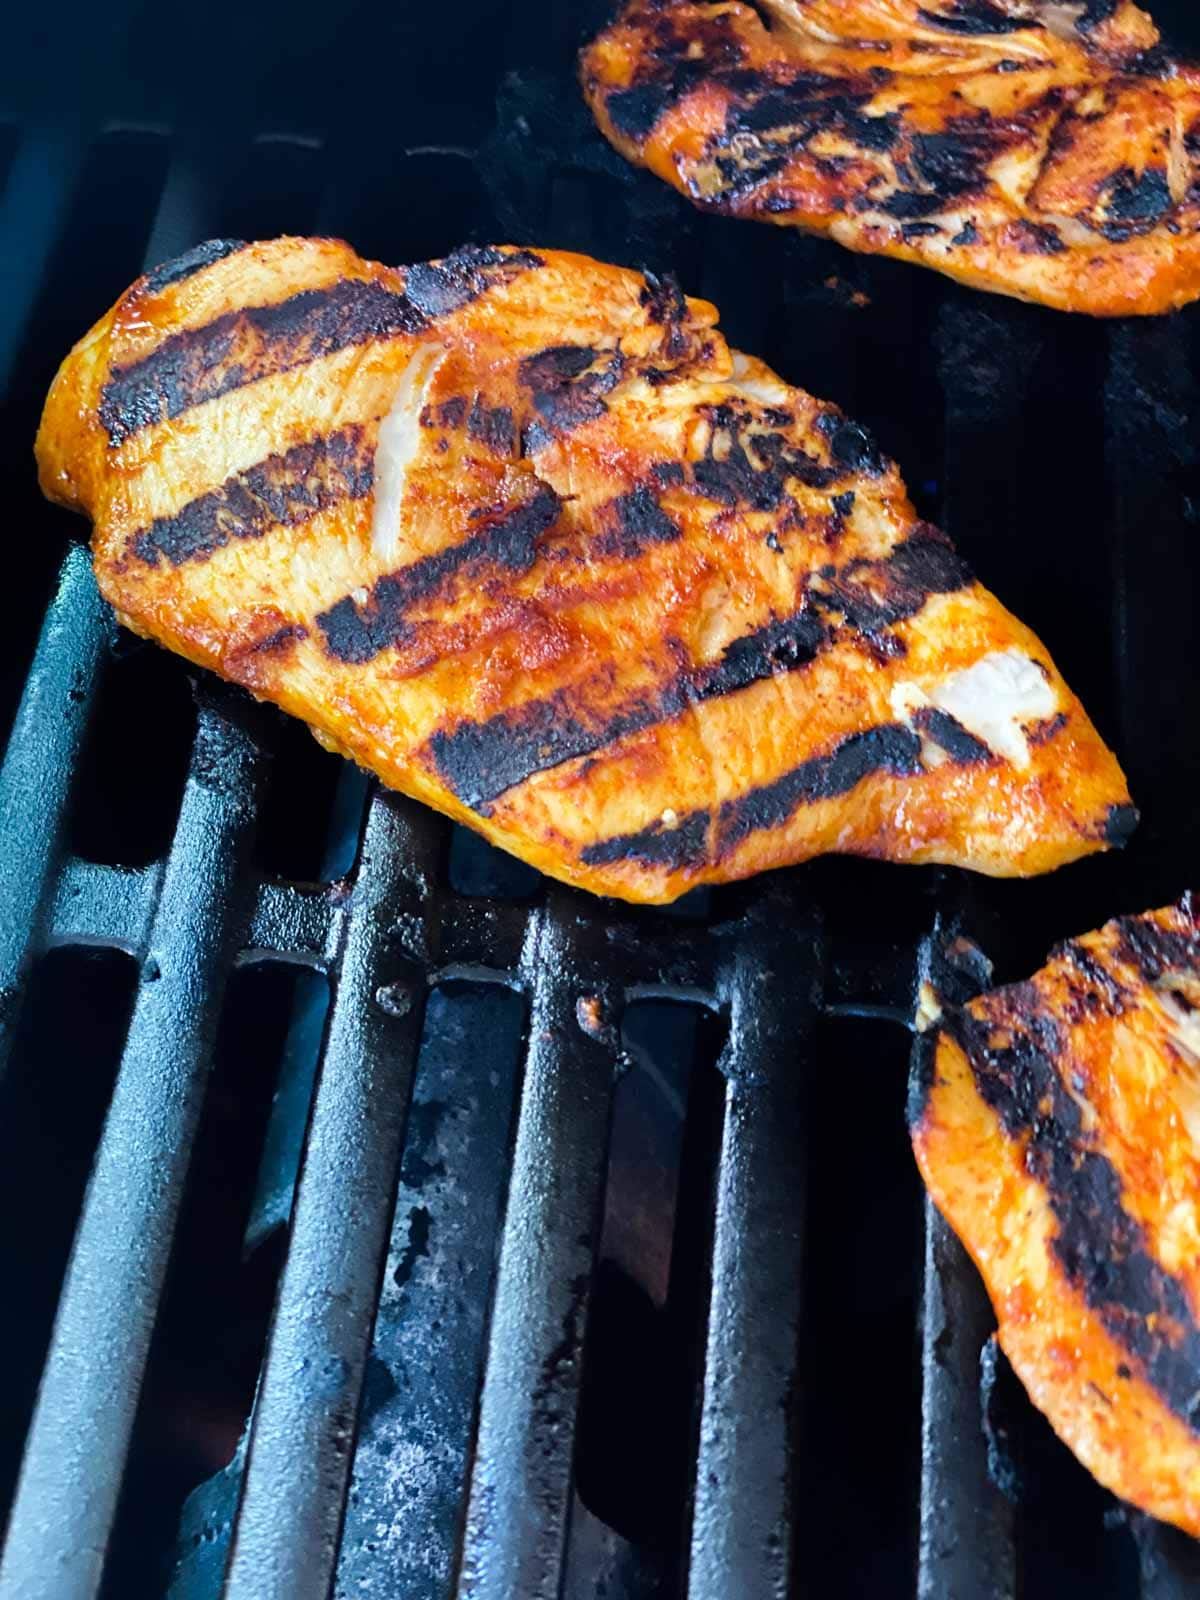 Grilled chicken breasts on a gas grill.